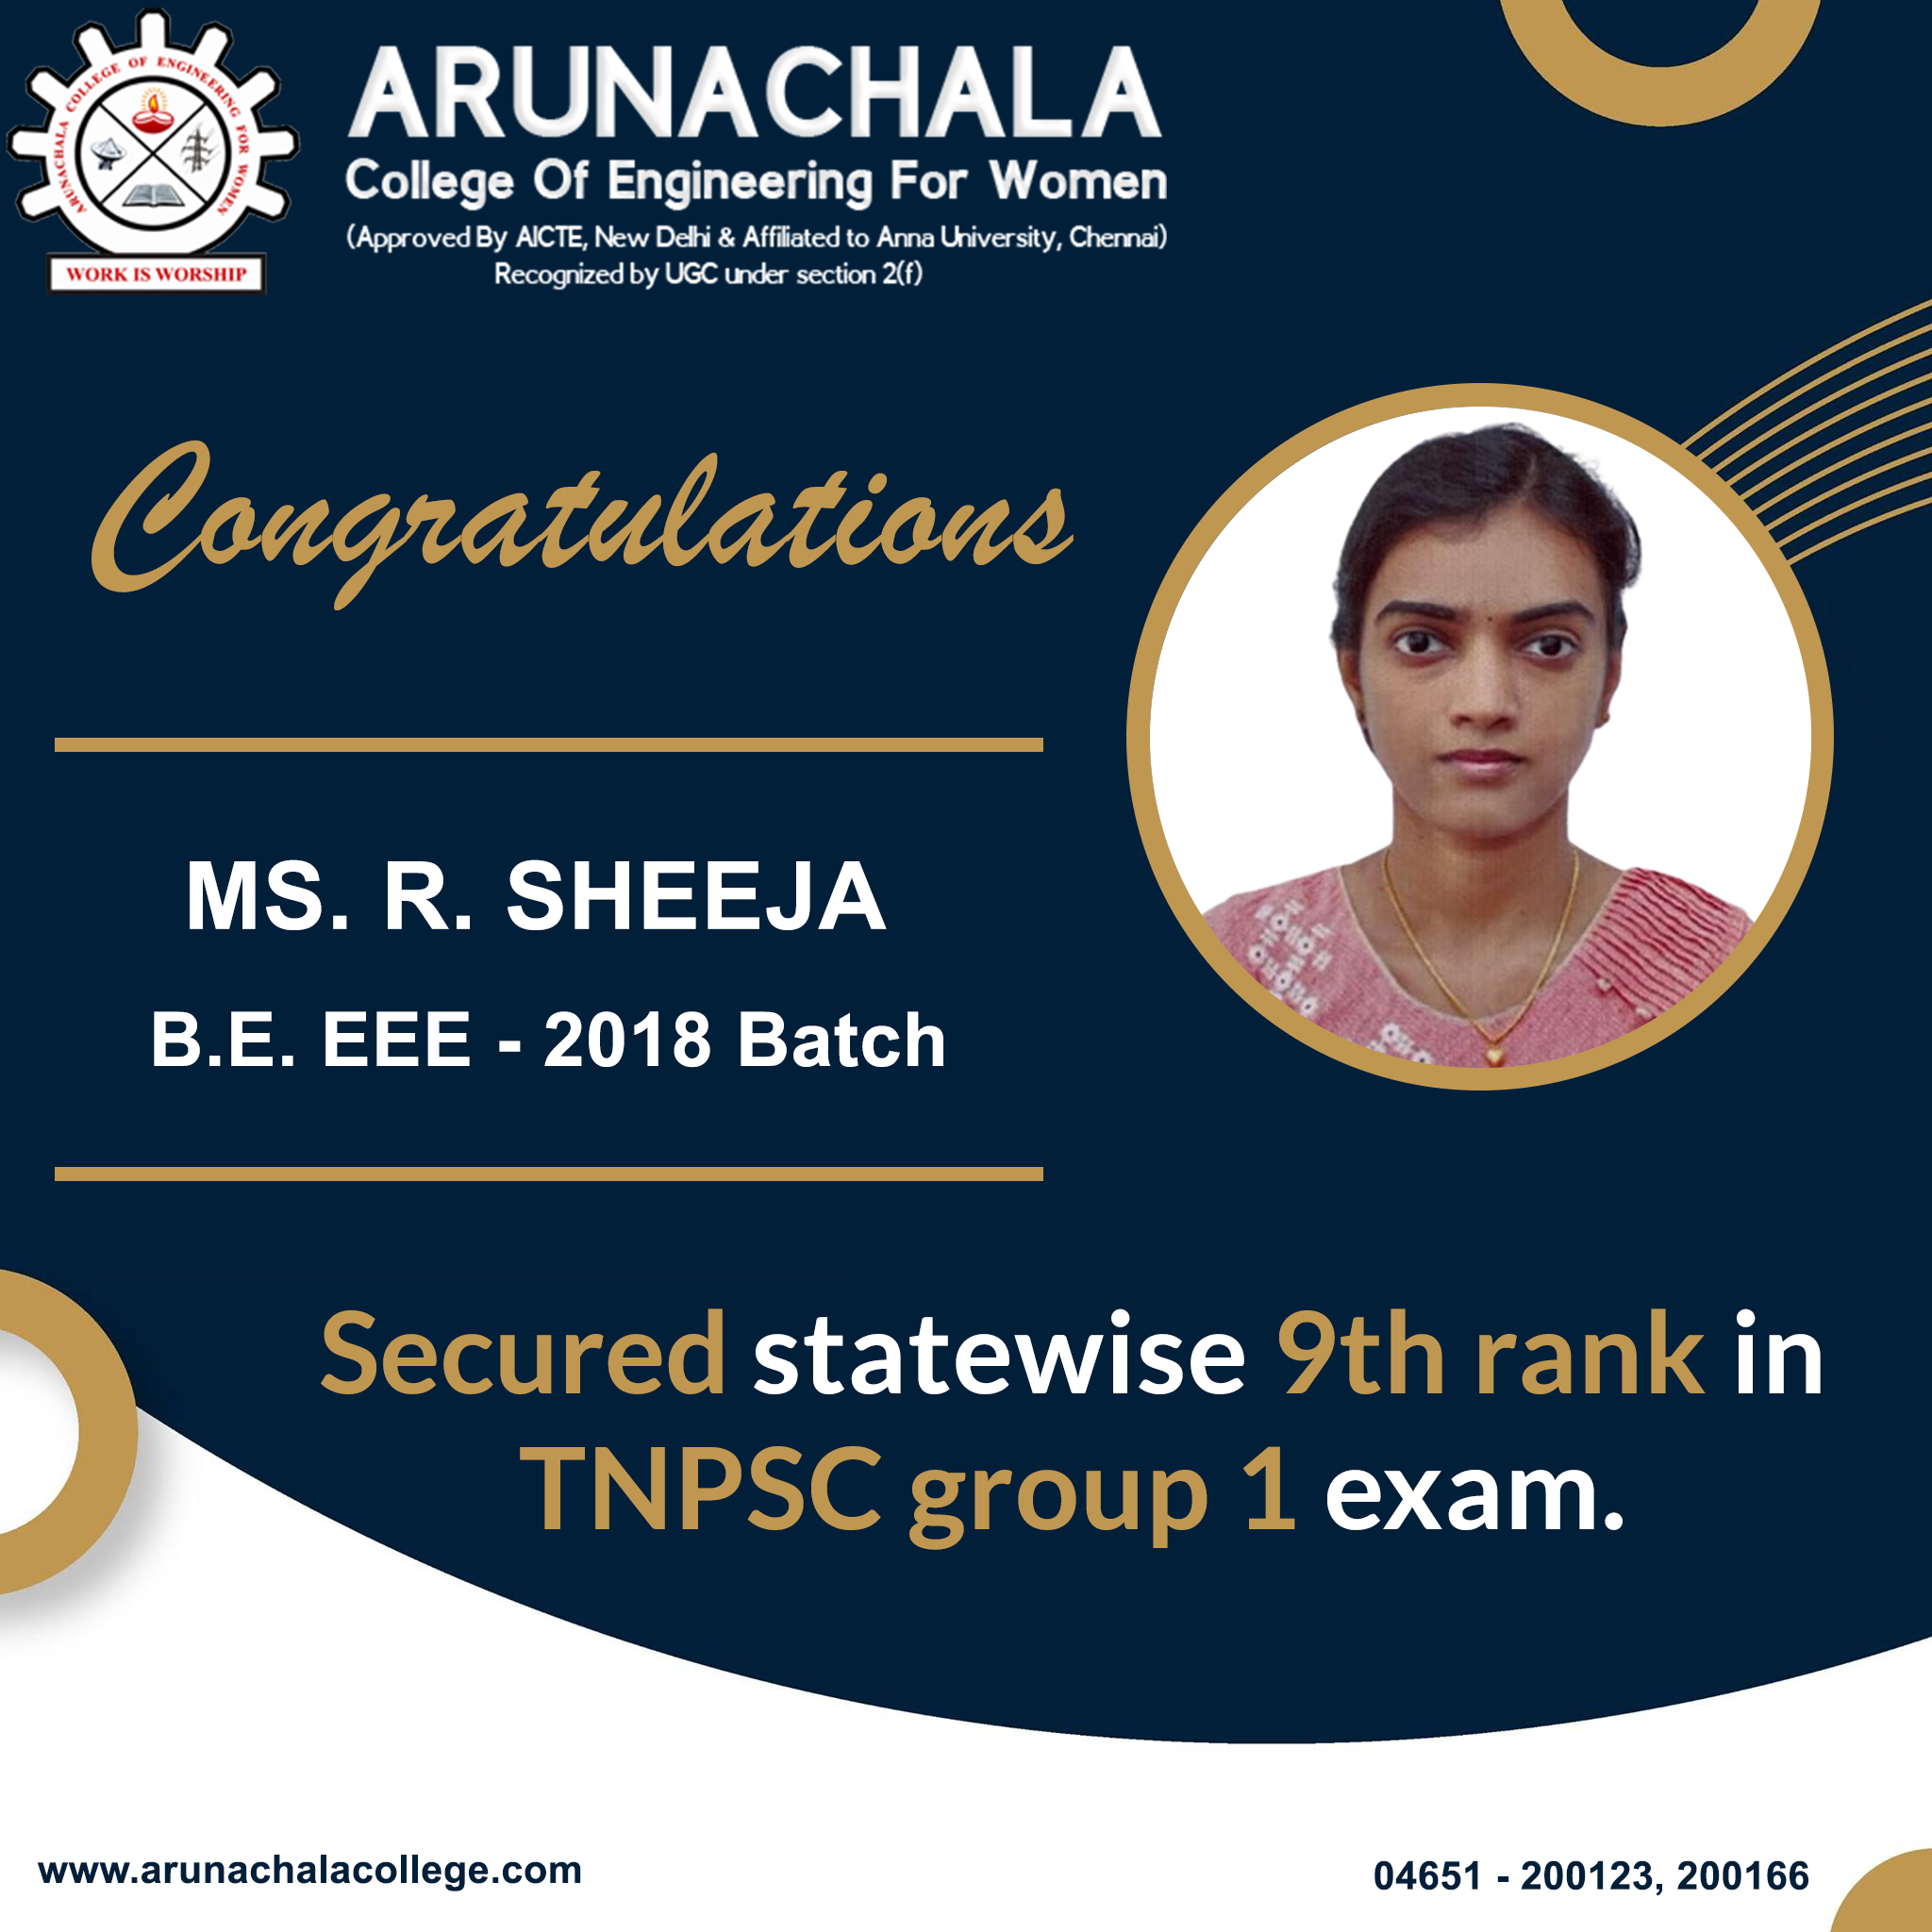 Congratulations to Ms. SHEEJA. R for achieving 9th rank in TNPSC group 1 exam